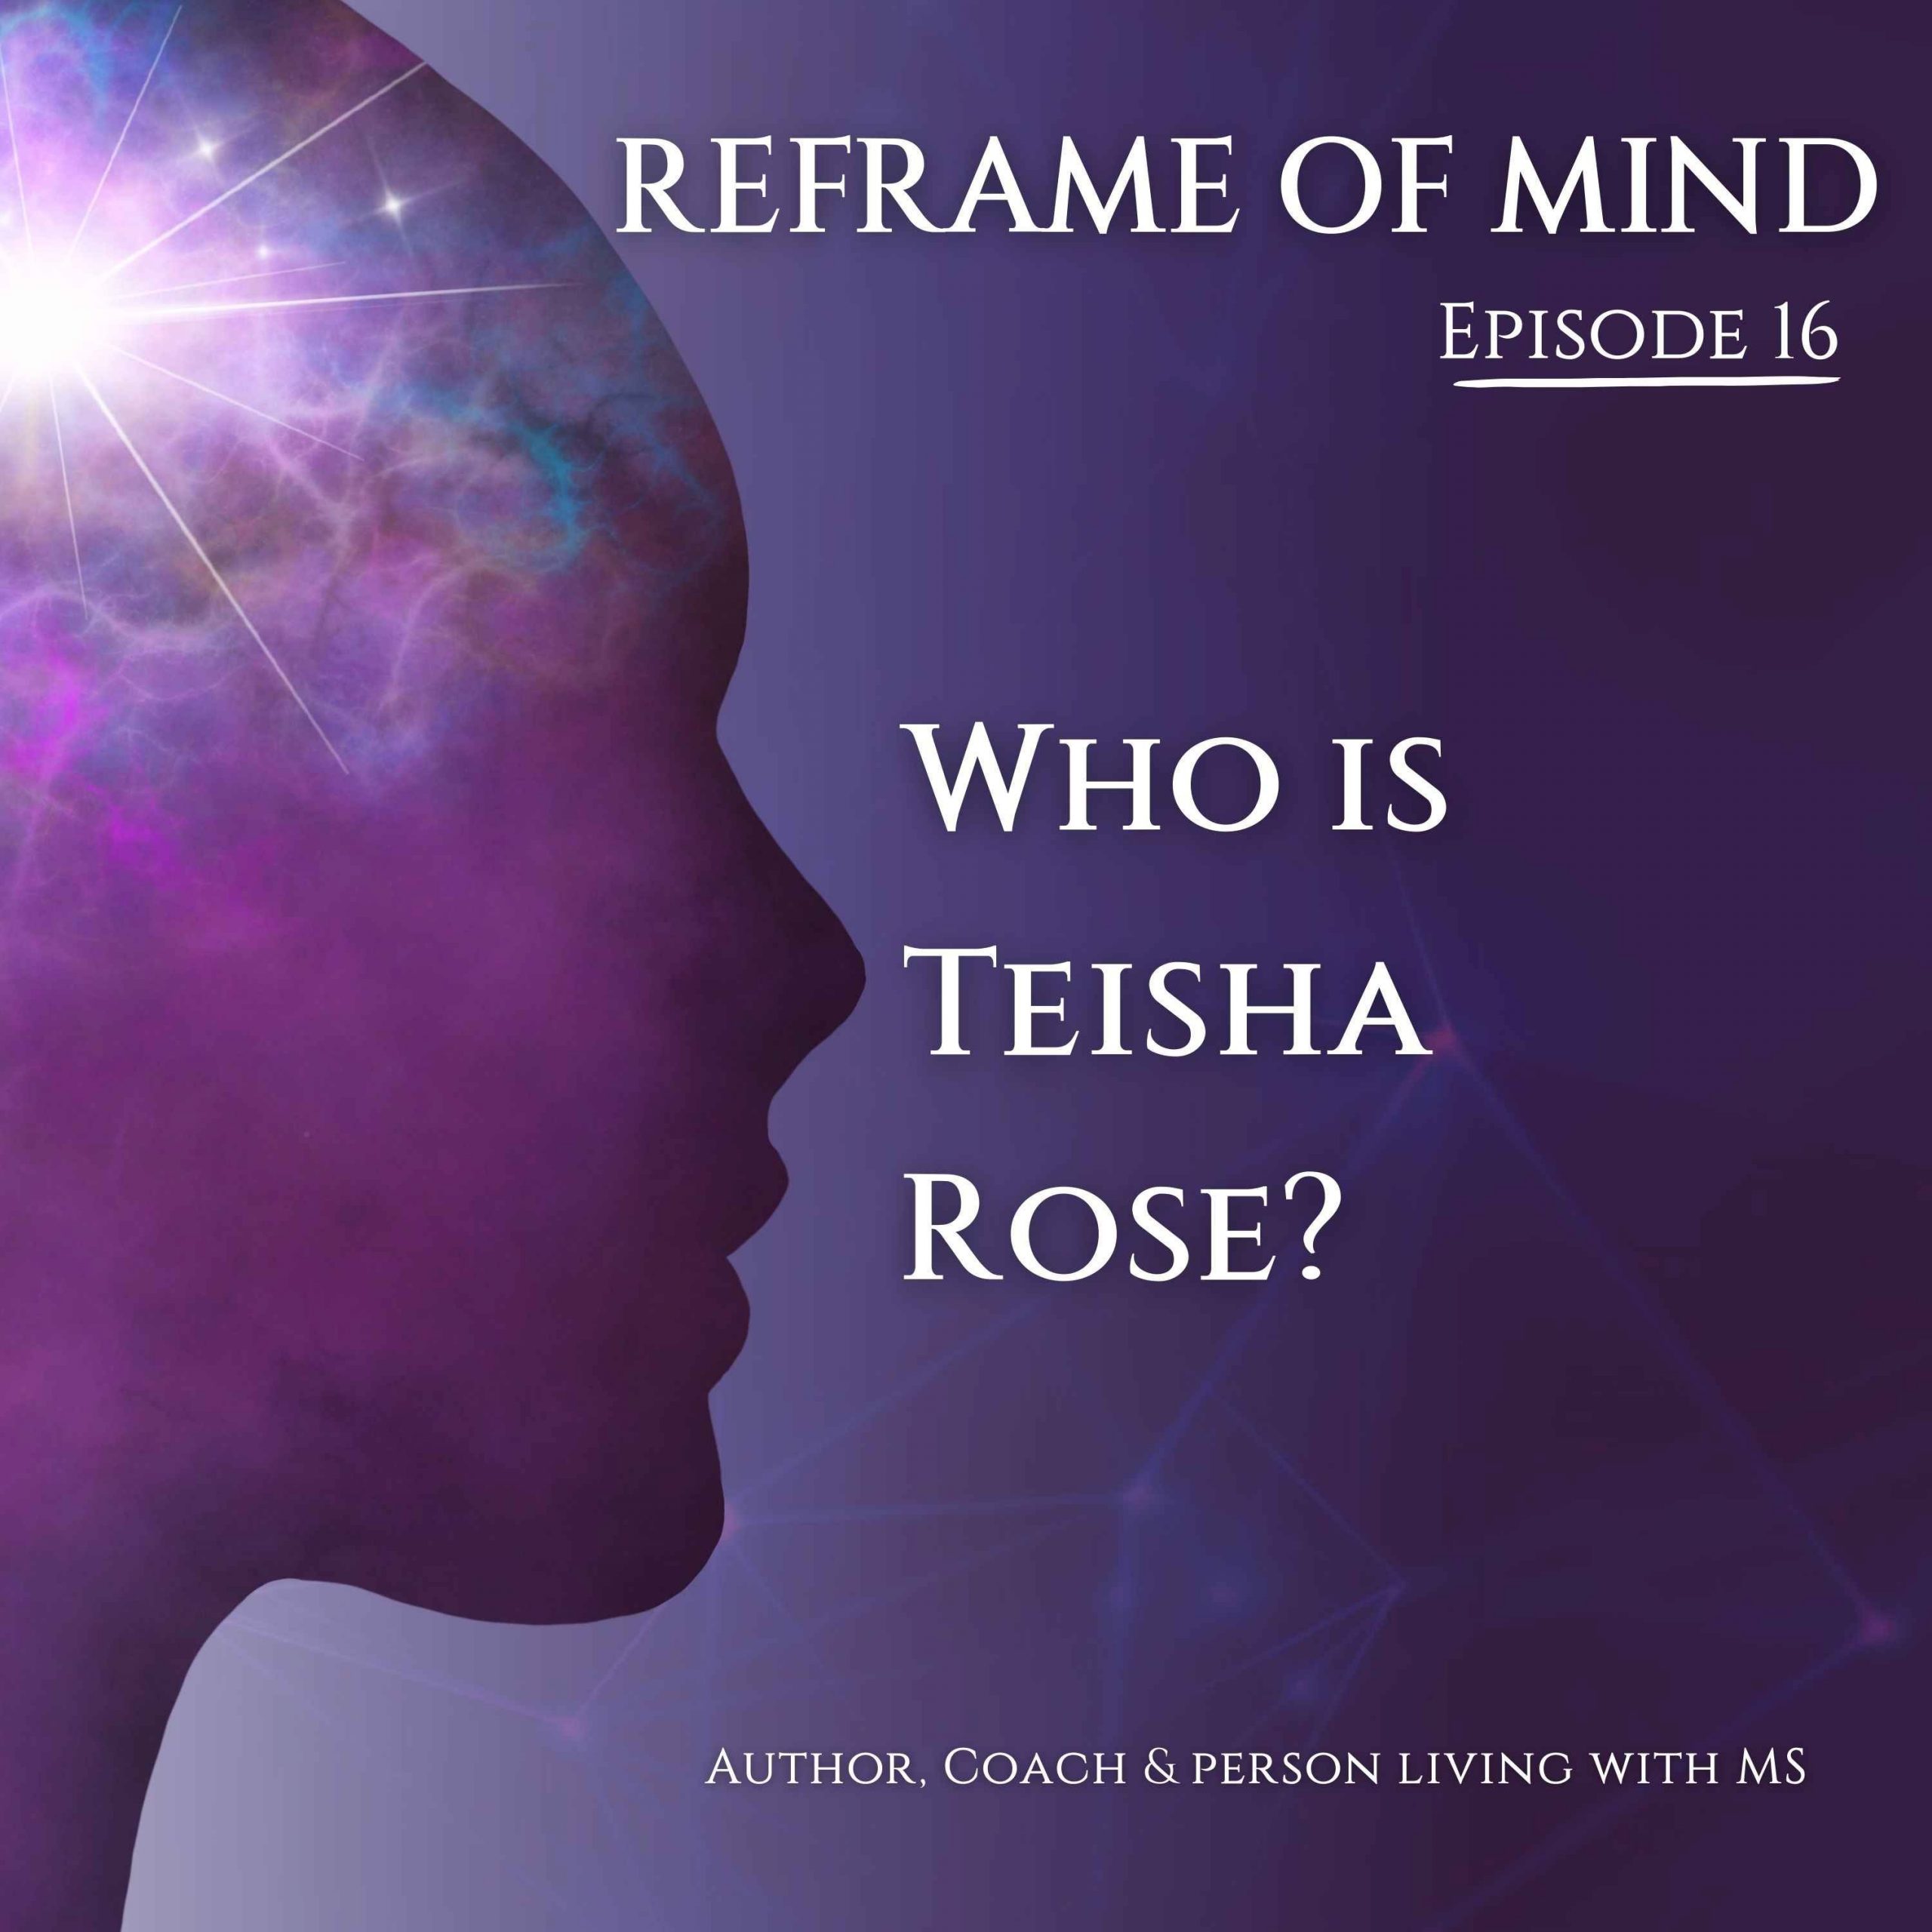 Episode 16: Who is Teisha Rose?